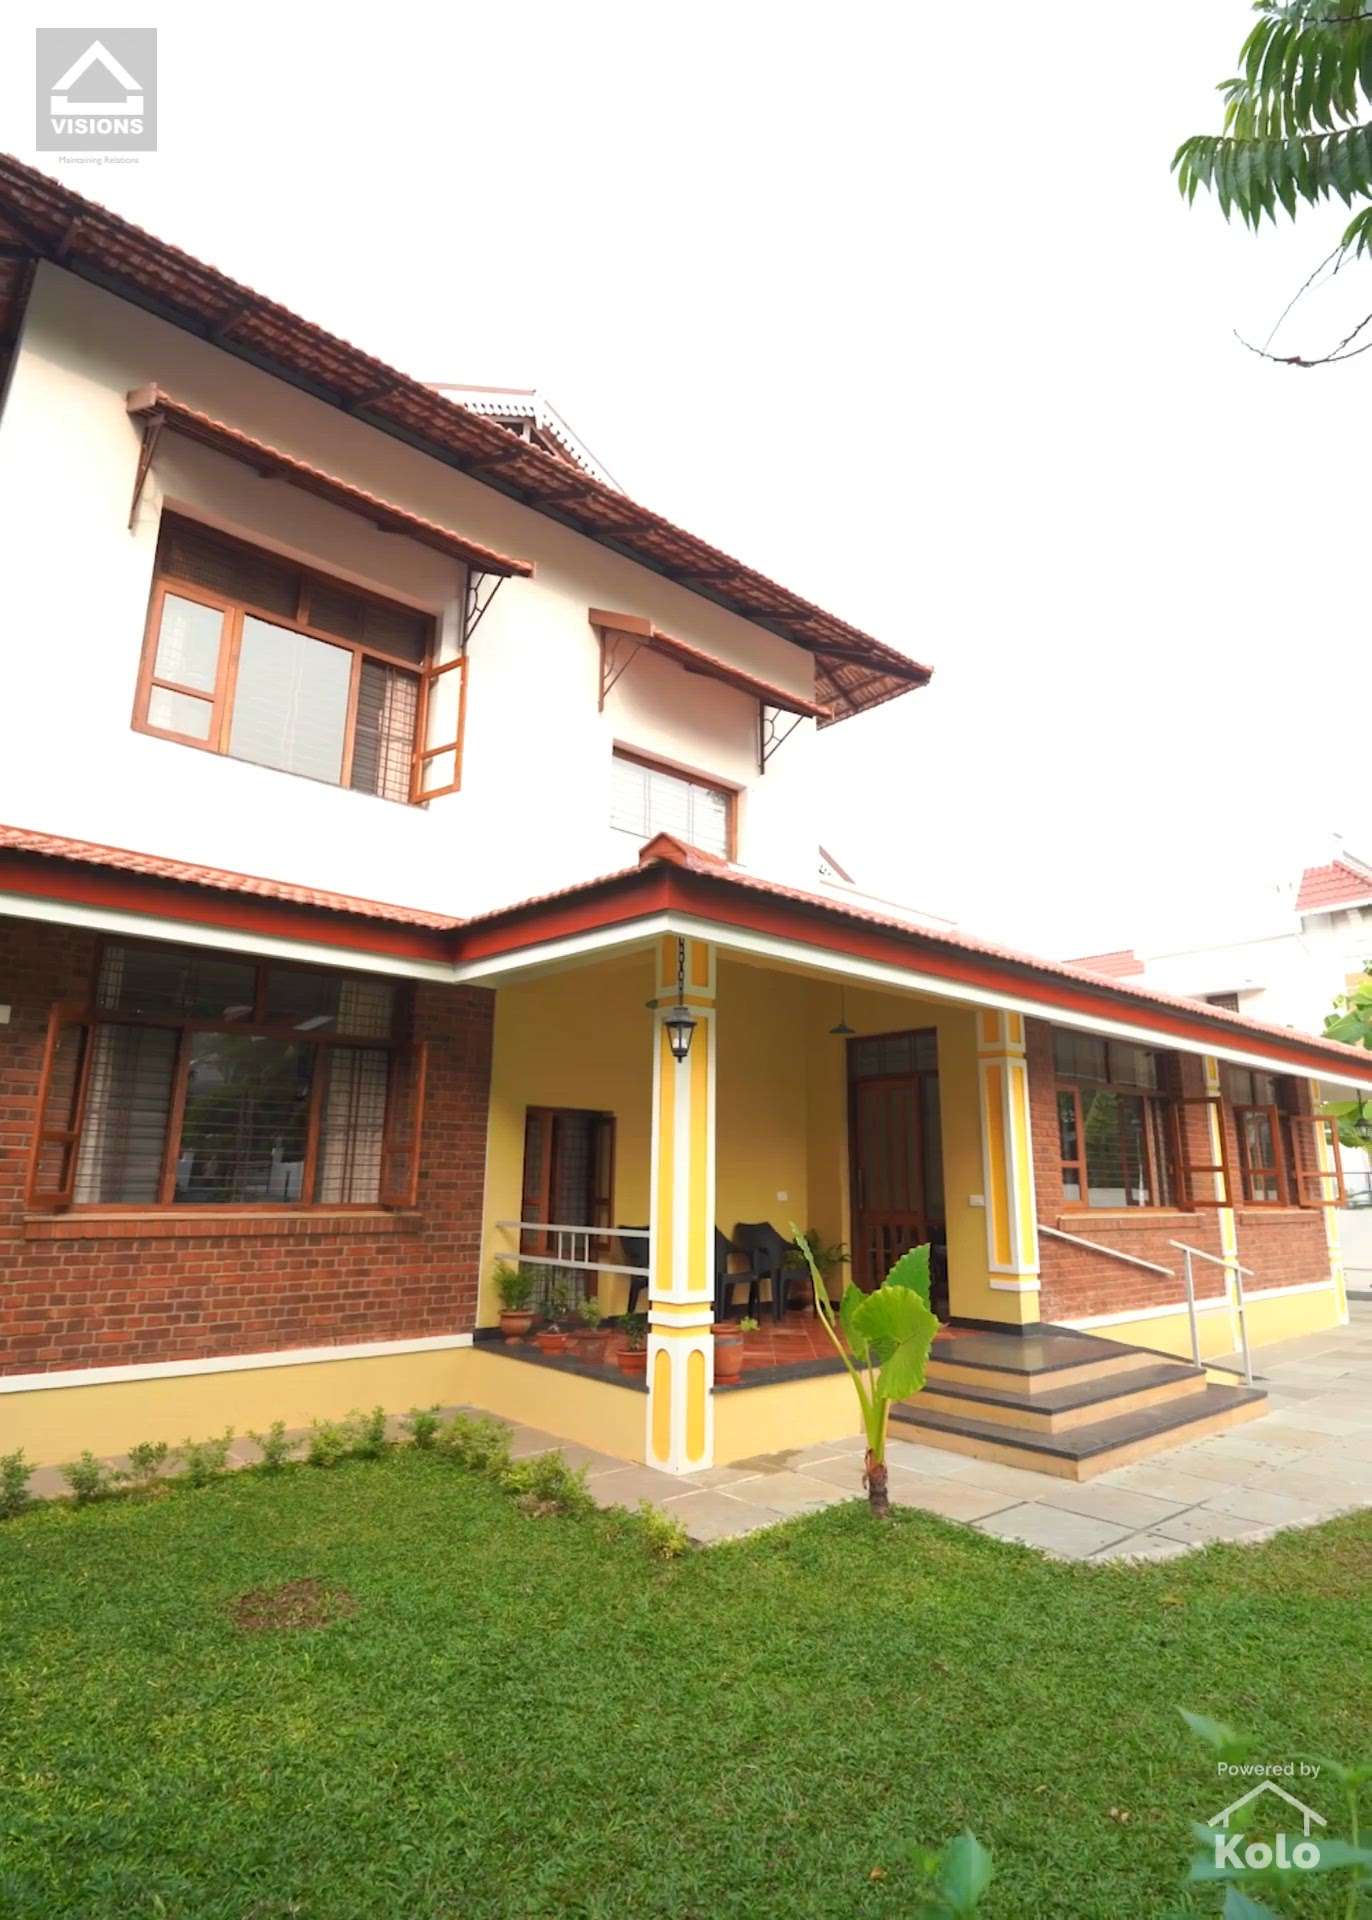 3000 Sq.ft/5BHK/Traditional style
/Two storey/Thrissur

Project Name: Rama Pisharody's 5 BHK Traditional Home
Storey: Two
Total Area: 3000 sqft
Bedrooms: 5
Elevation Style: Mix of Kerala Traditional and North Indian Architecture 
Location: Kuttur, Thrissur
Completed Year: 2023

Cost: 1.5 cr
Plot Size: 25 Cent

#keralatraditional #twostorey #5BHK #3000SqftHouse